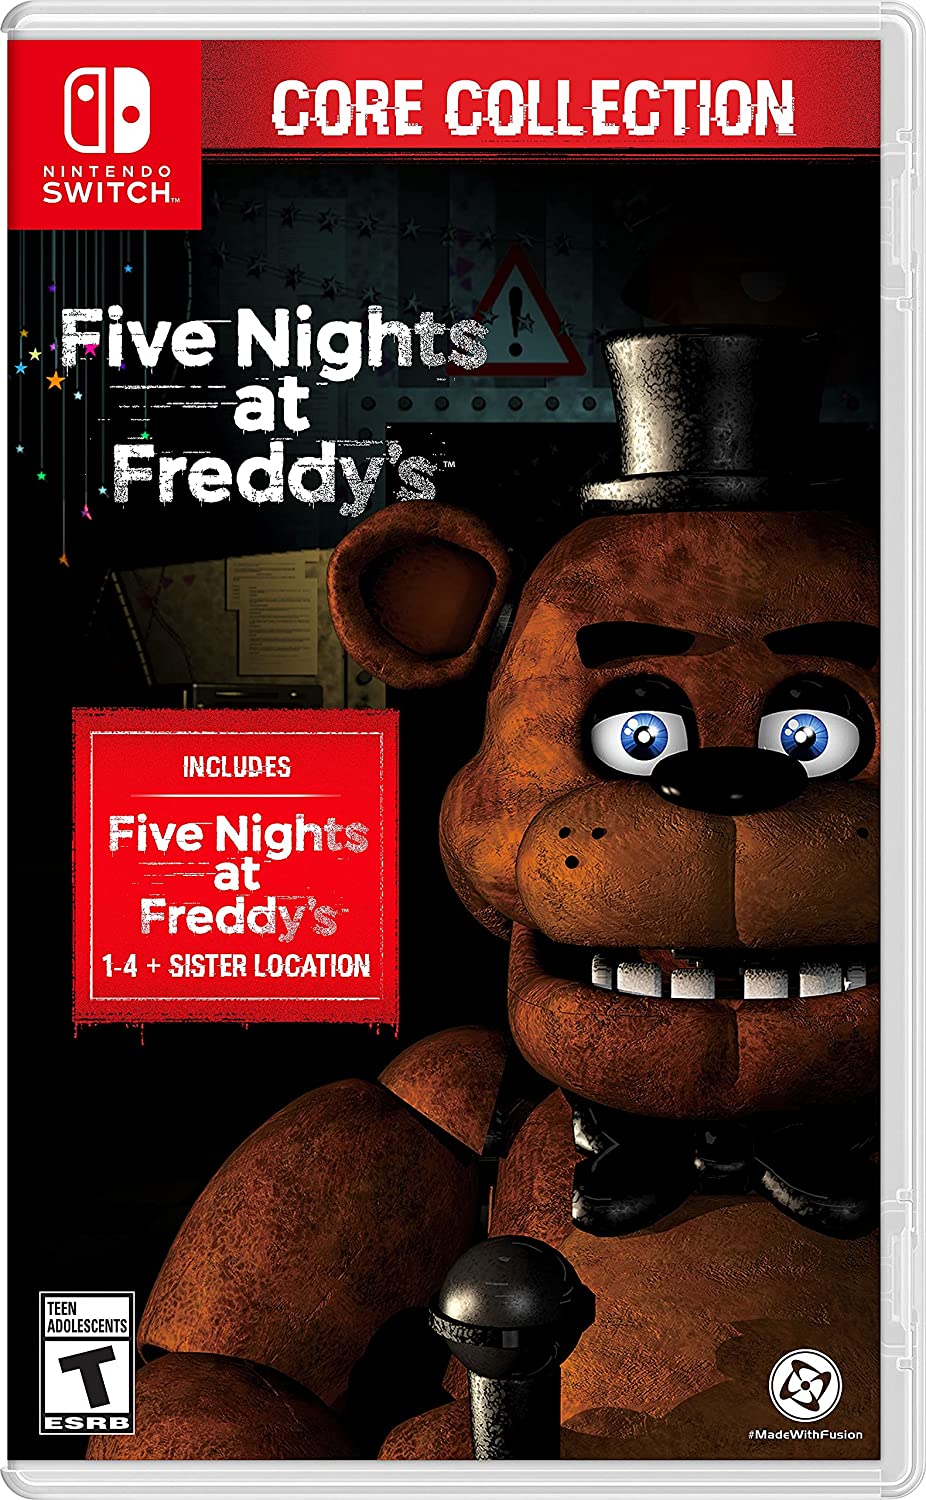 FIVE NIGHTS AT FREDDY'S THE CORE COLLECTION - EasyVideoGame